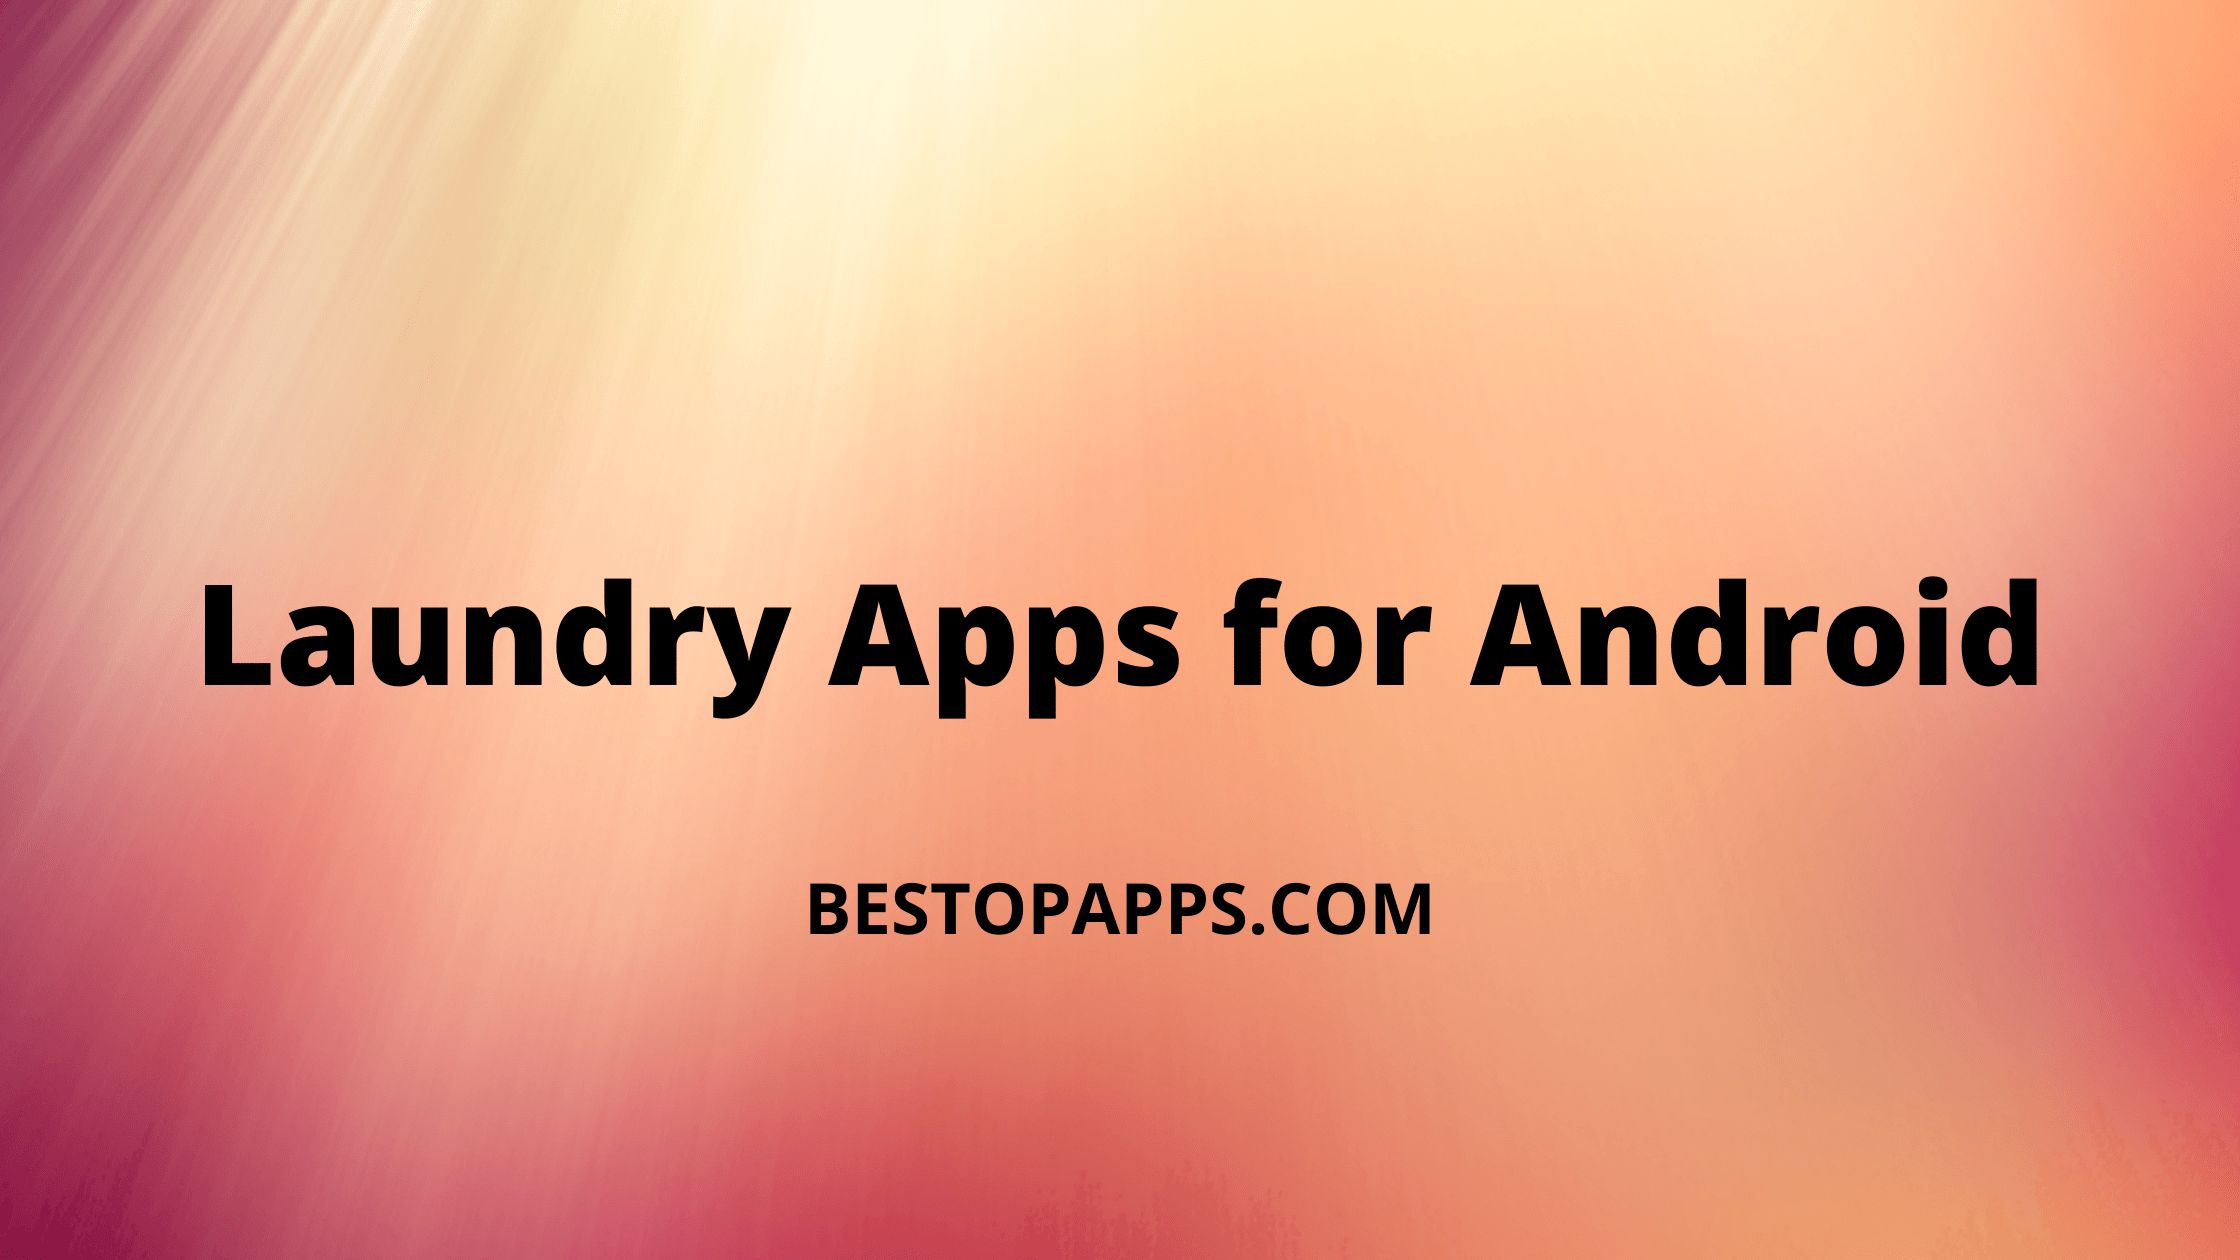 Laundry Apps for Android